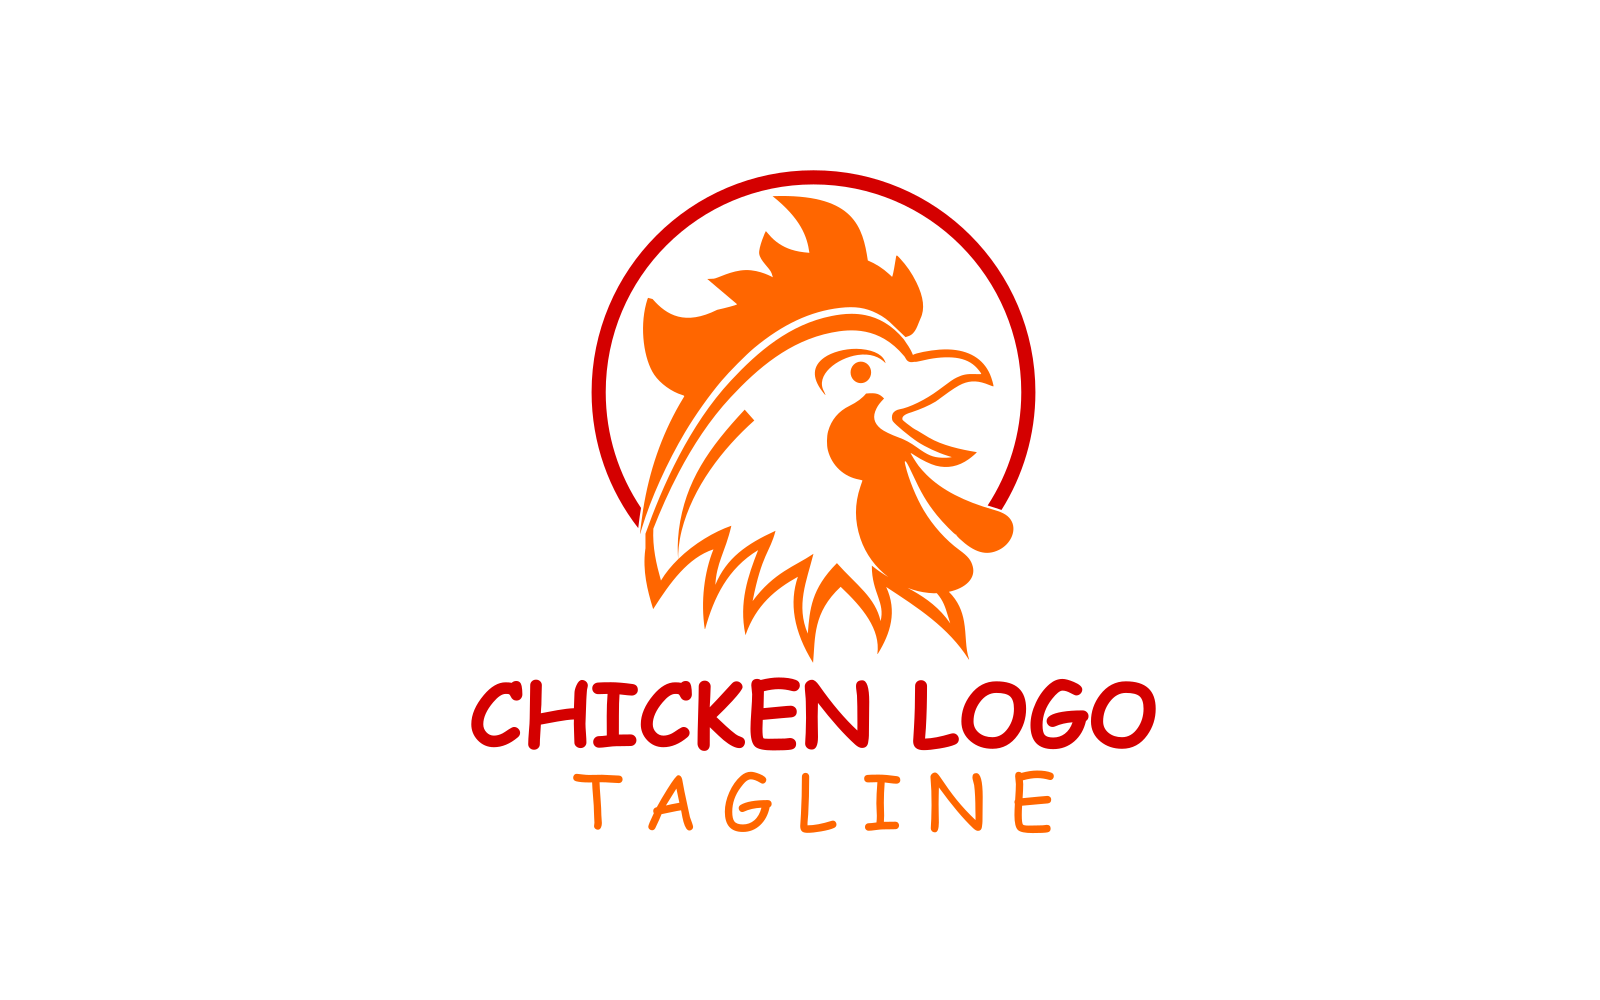 Kit Graphique #242993 Logo Rooster Web Design - Logo template Preview